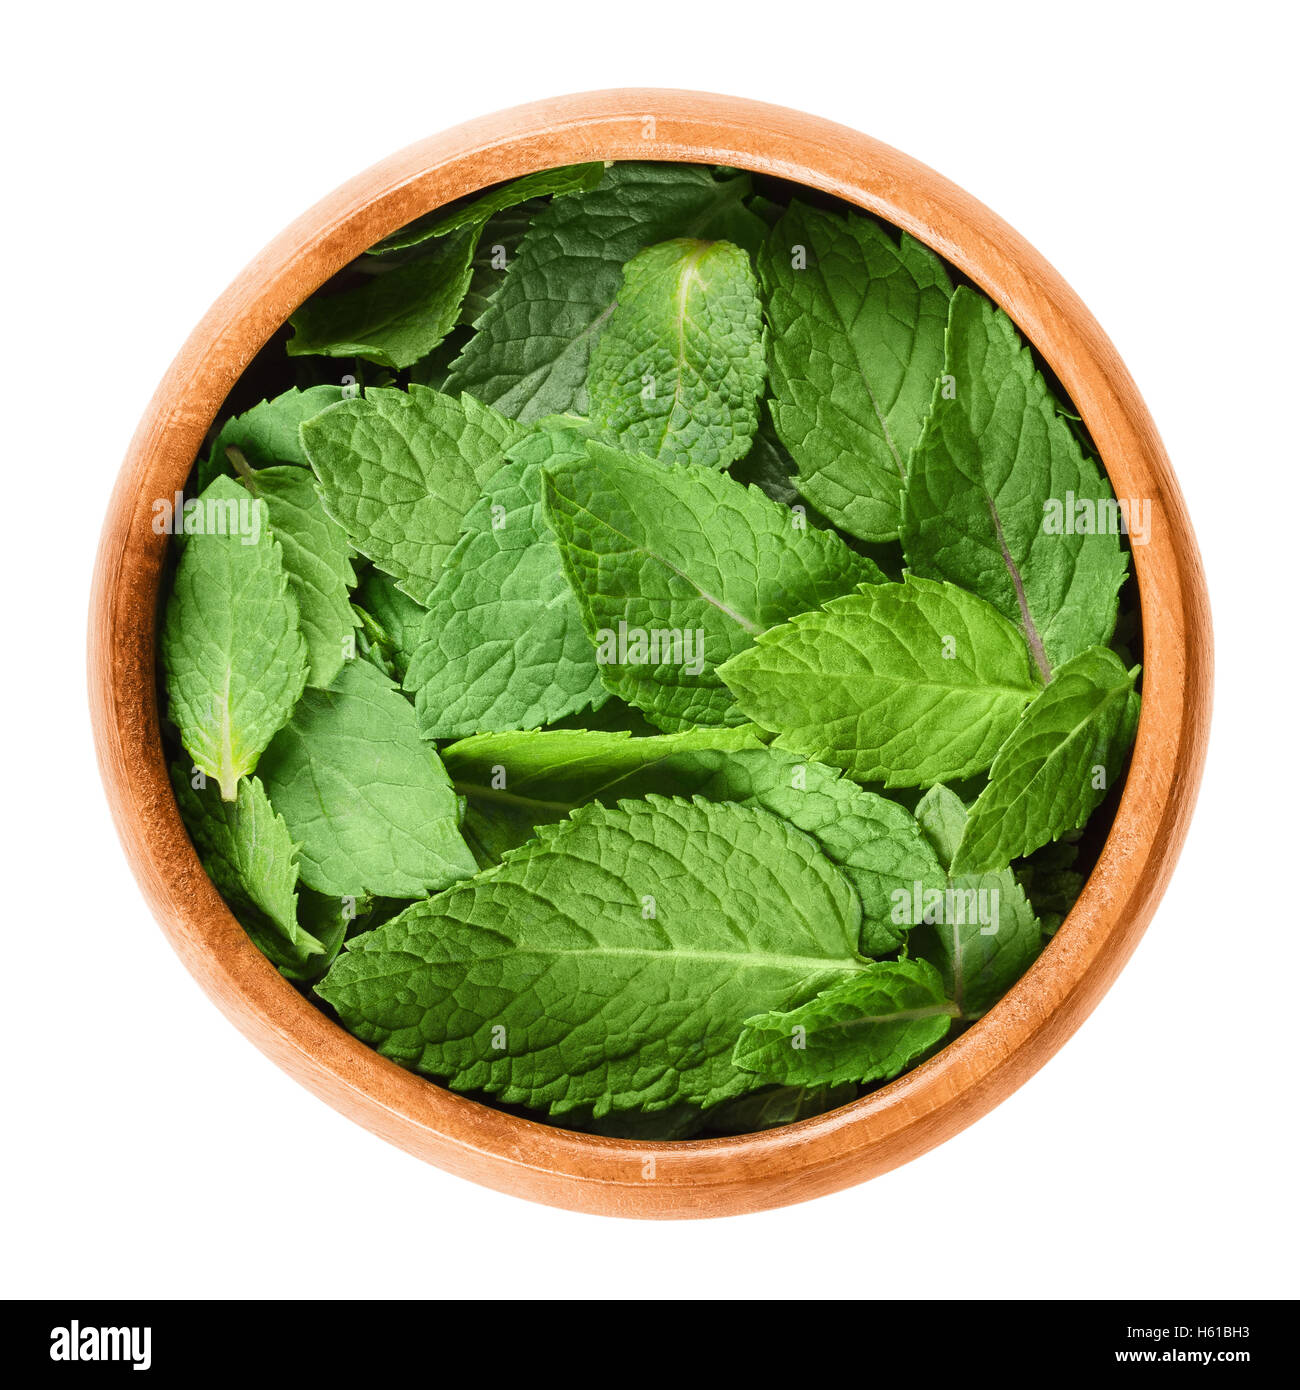 Fresh peppermint leaves in a wooden bowl on white background. Green Mentha piperita, an edible herb. Stock Photo